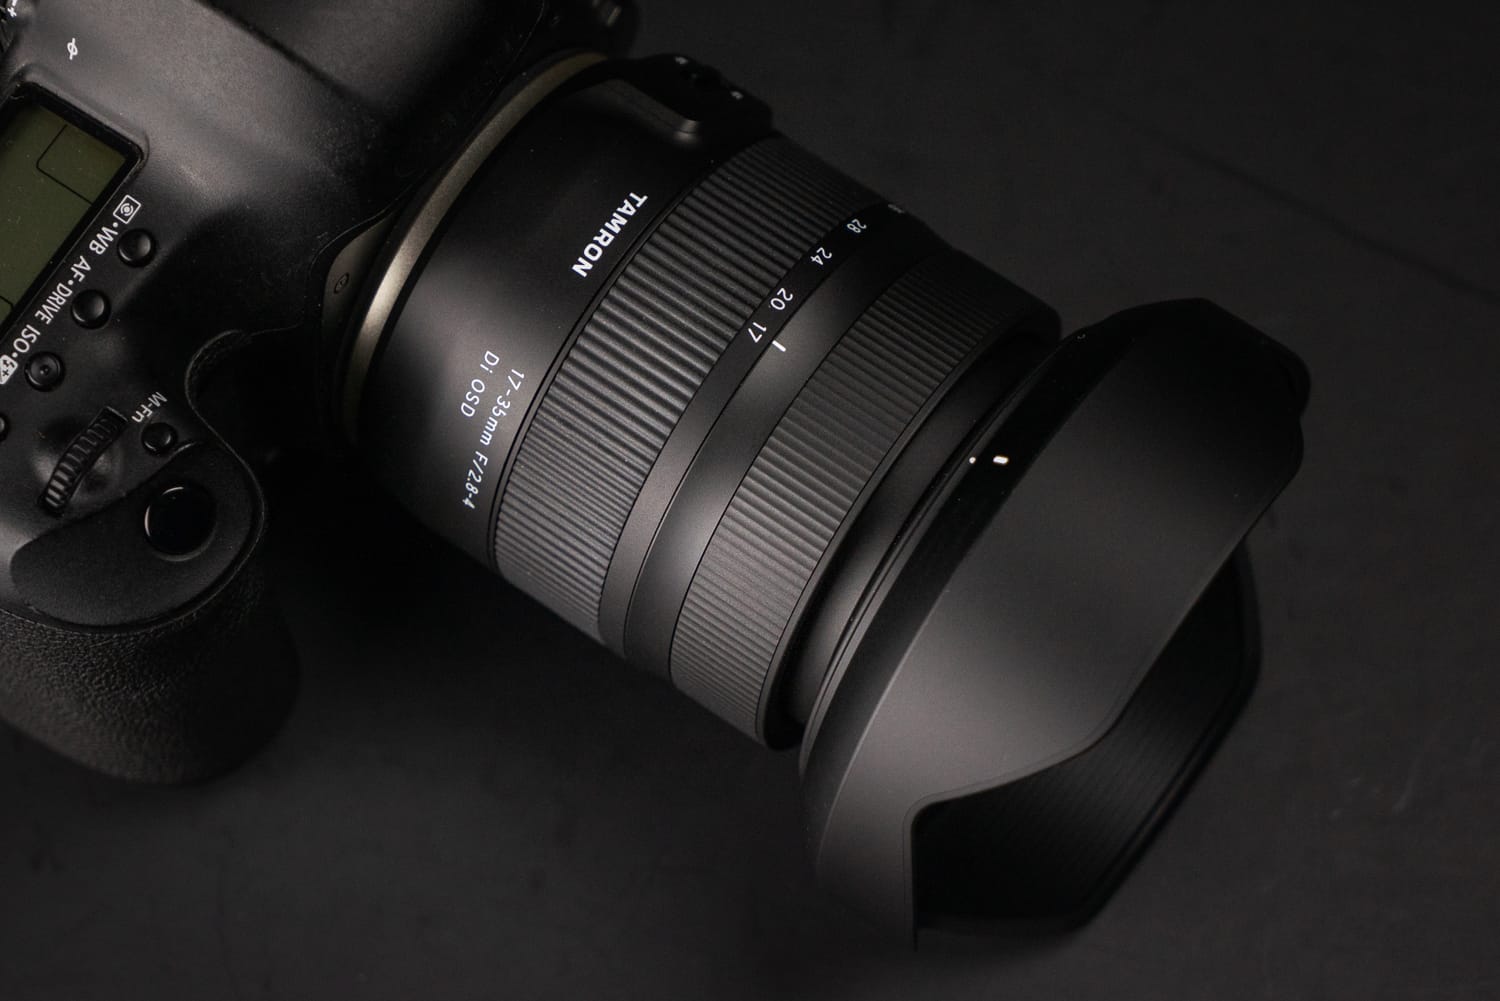 Review of the Tamron 17-35mm f/2.8-4 Di OSD Lens | Contrastly